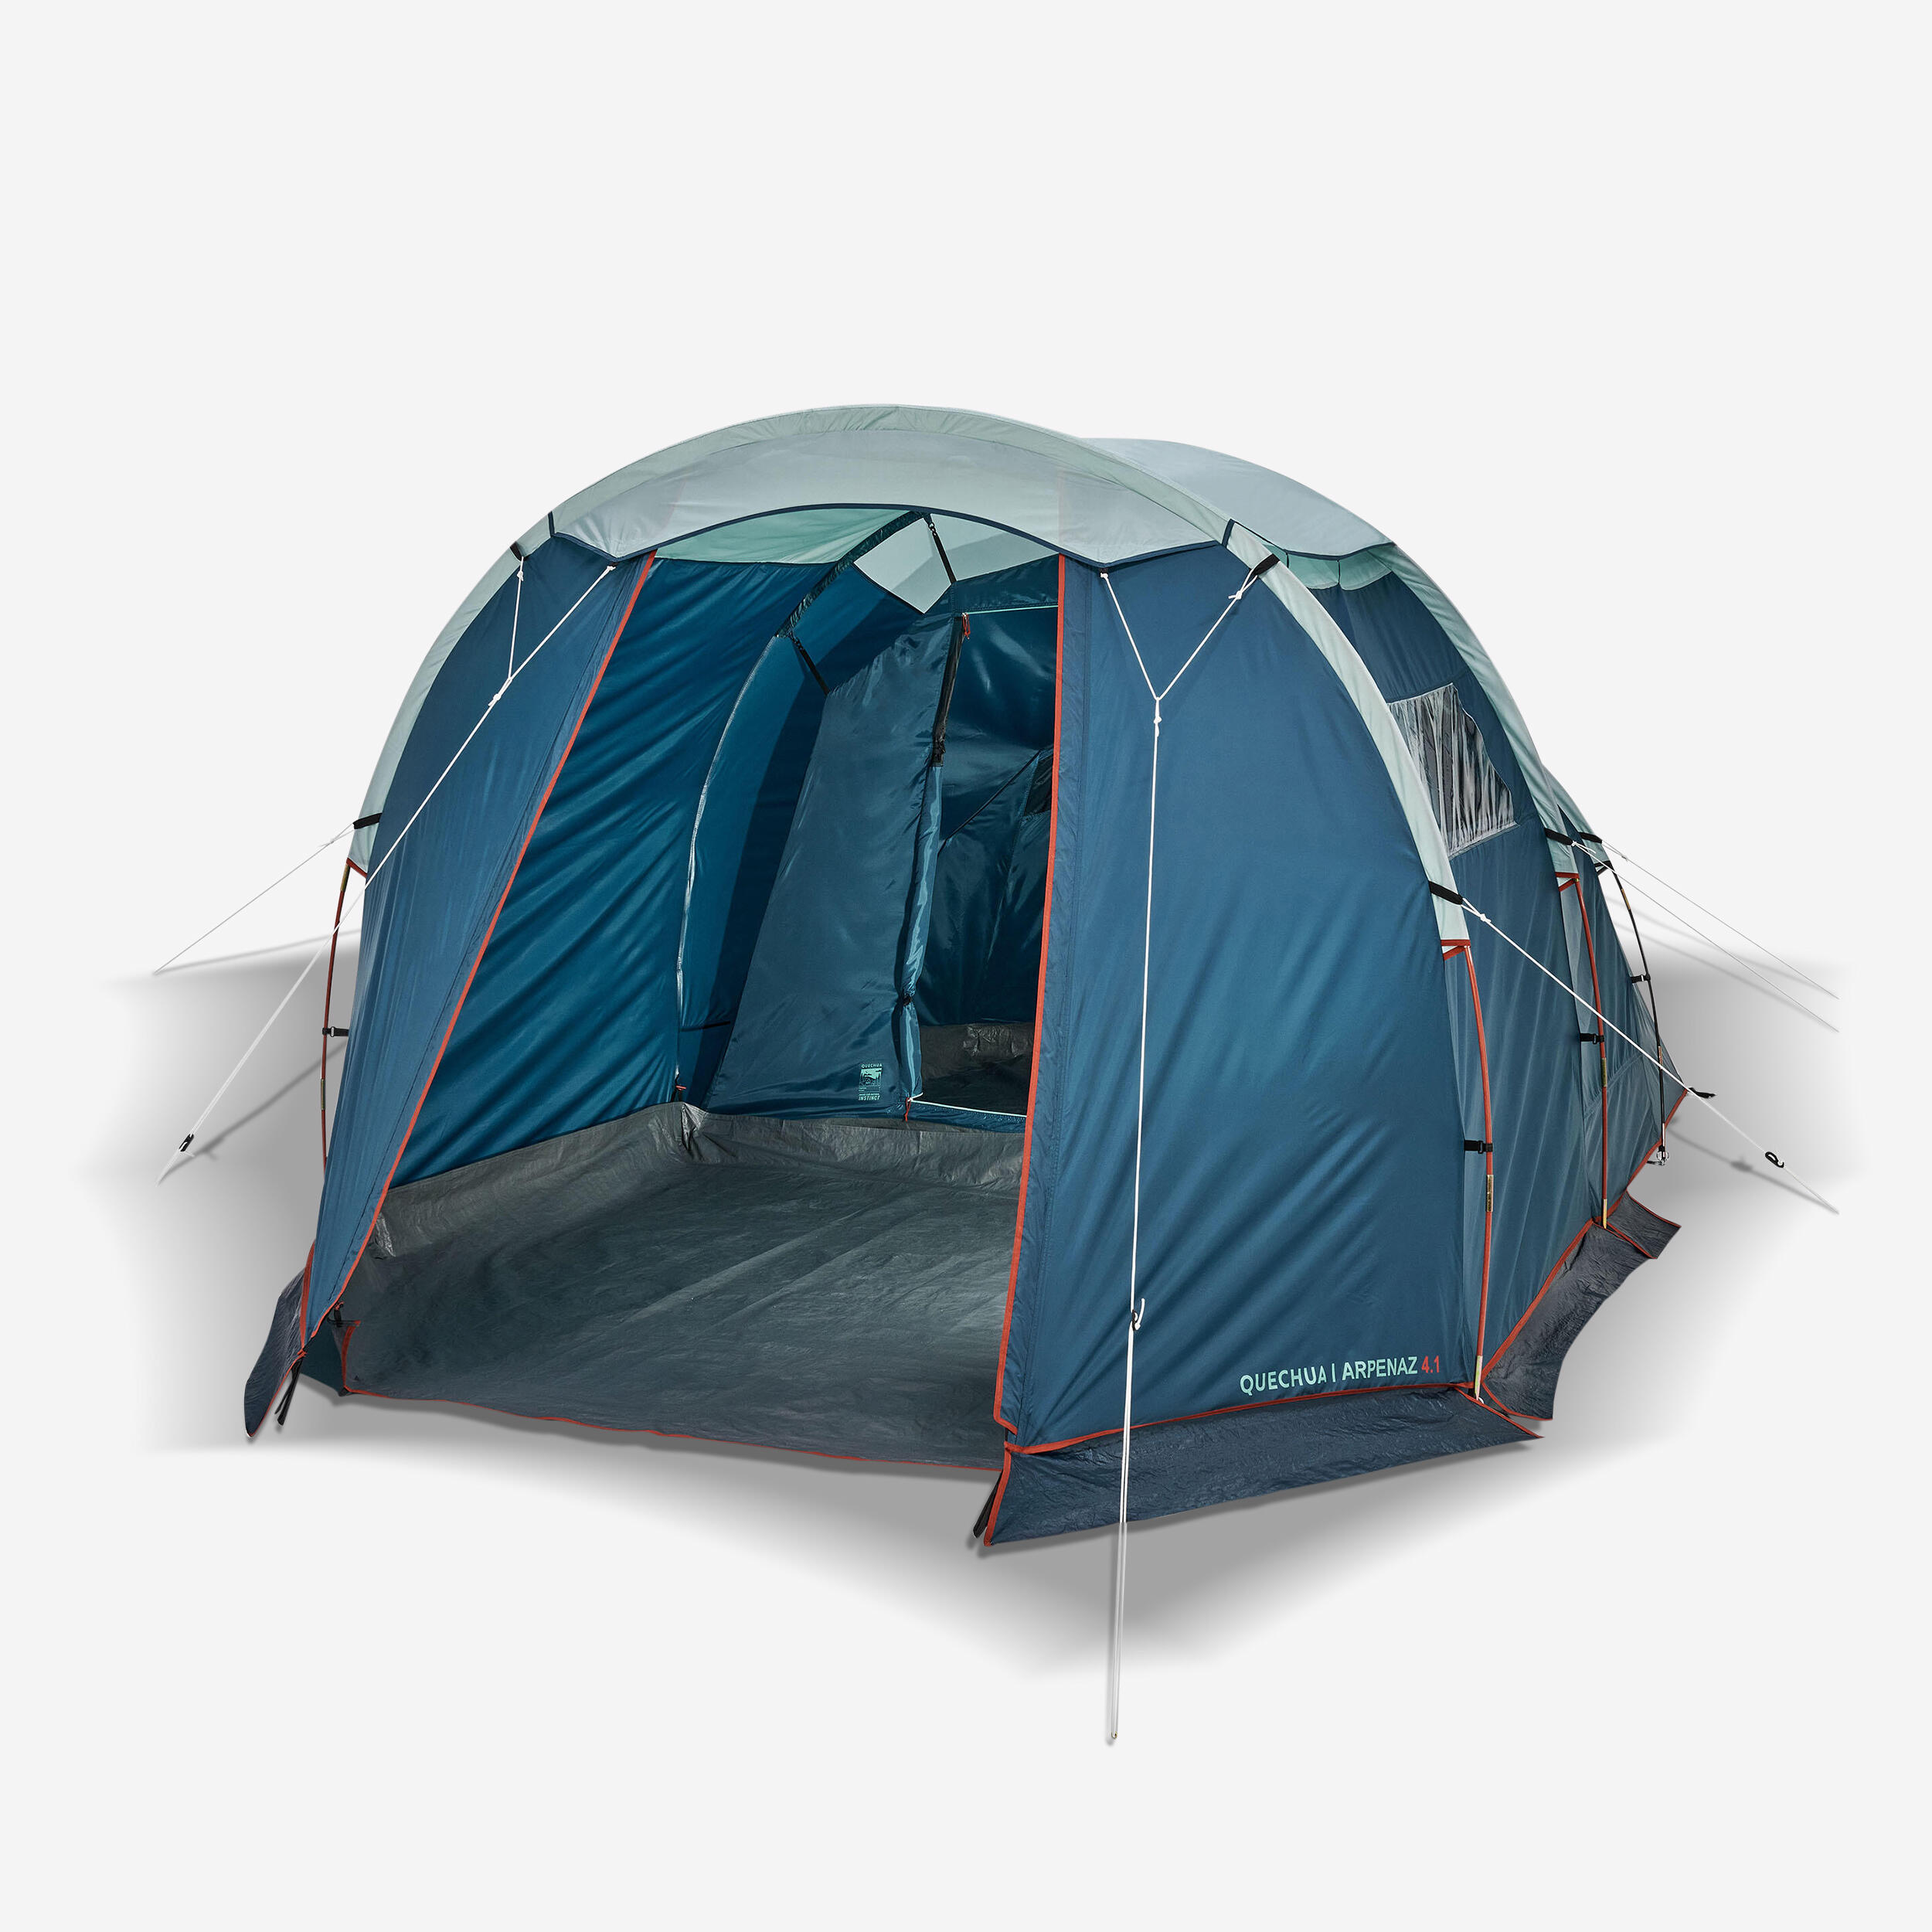 Camping tent with poles - Arpenaz 4.1 - 4 Person - 1 Bedroom 1/22